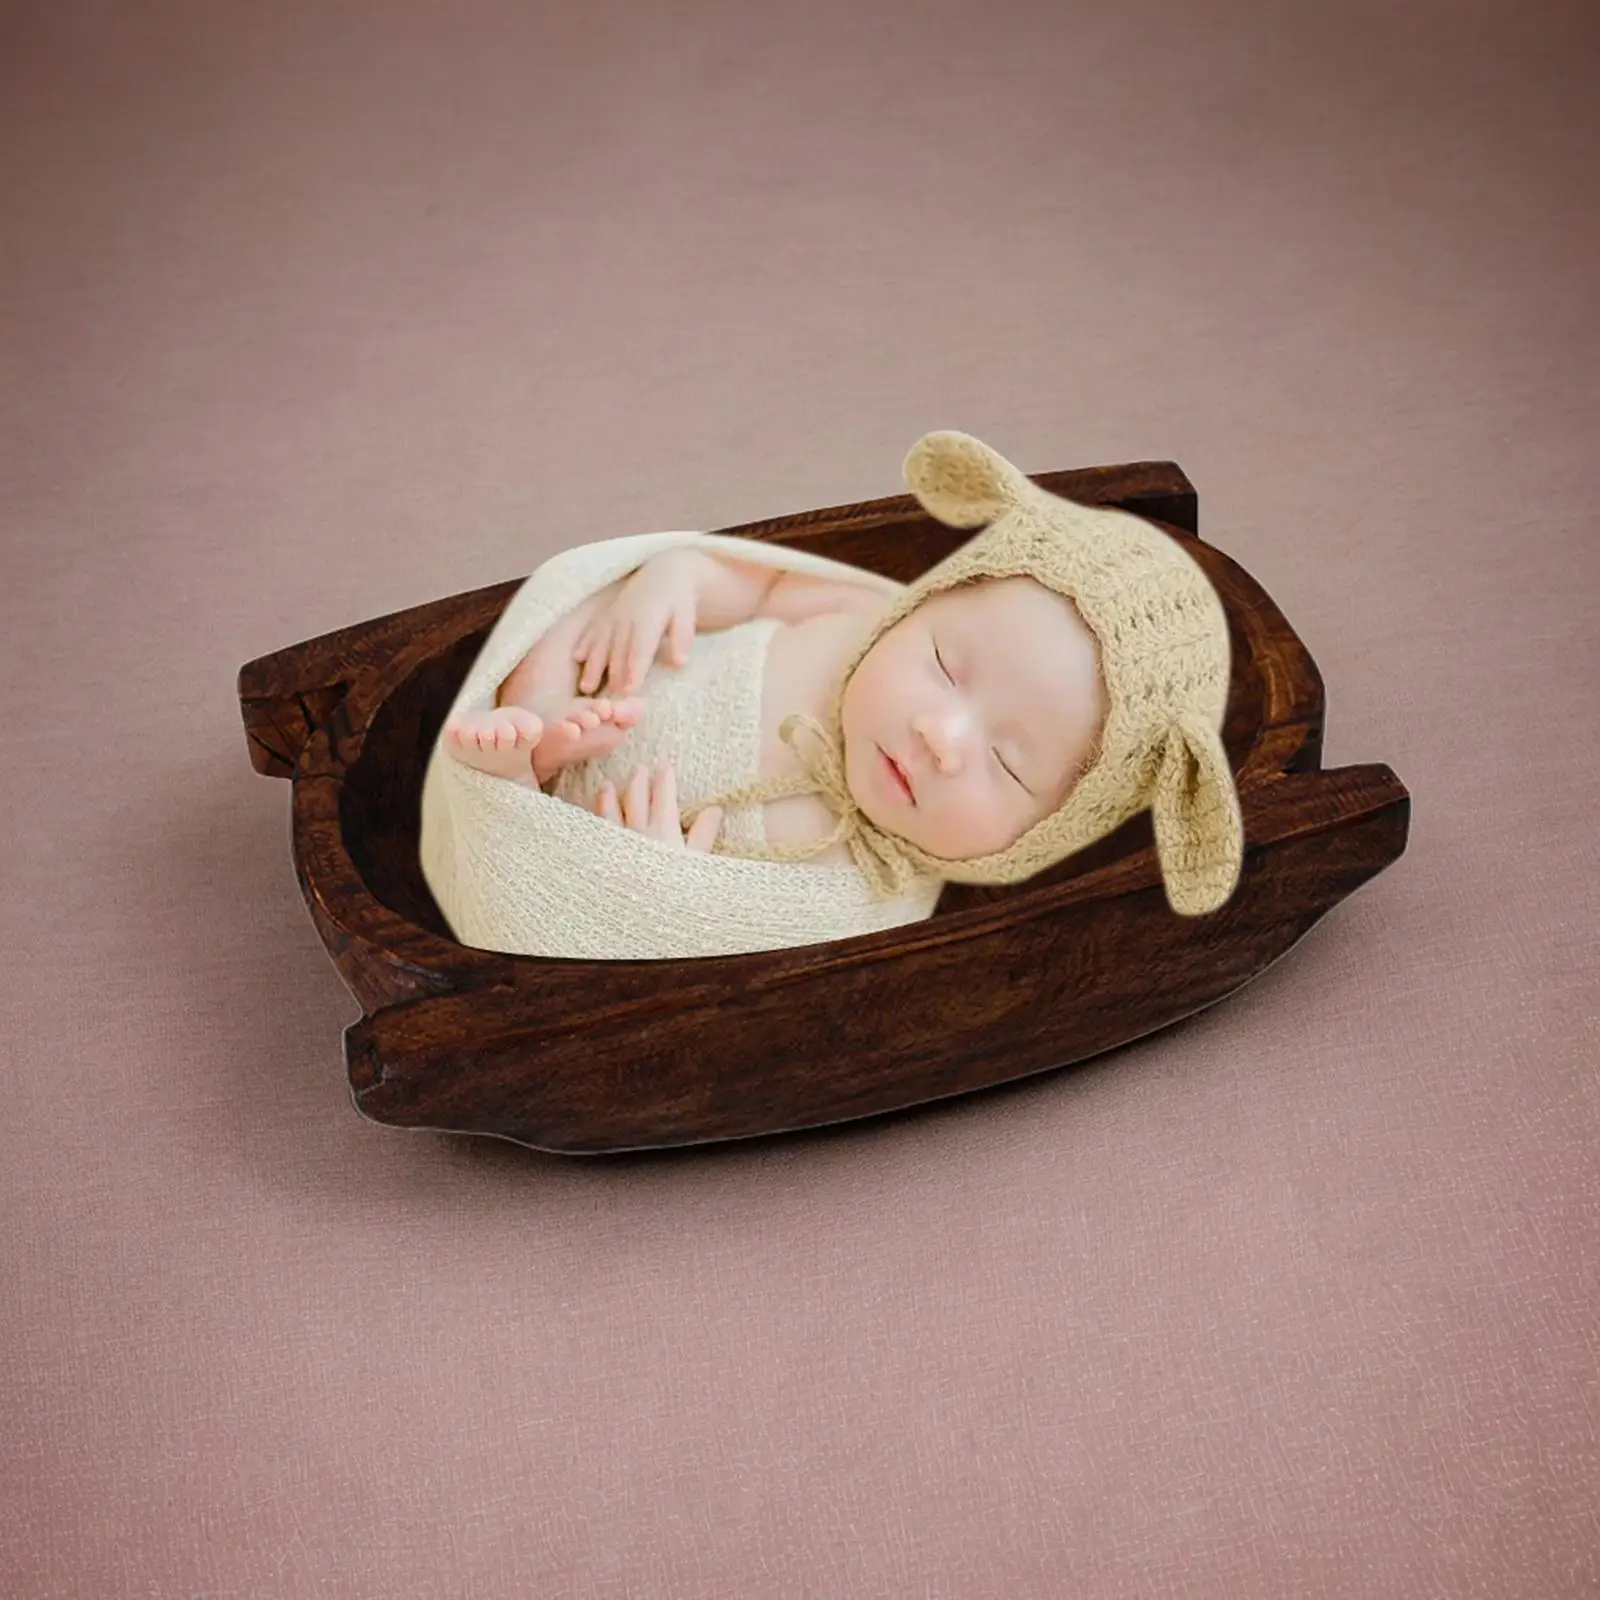 Newborn Baby Photography Props Wooden Prop Decoration Posing Sofa Seat for Monthly Baby Newborn Baby Girls Boys Birthday Decor